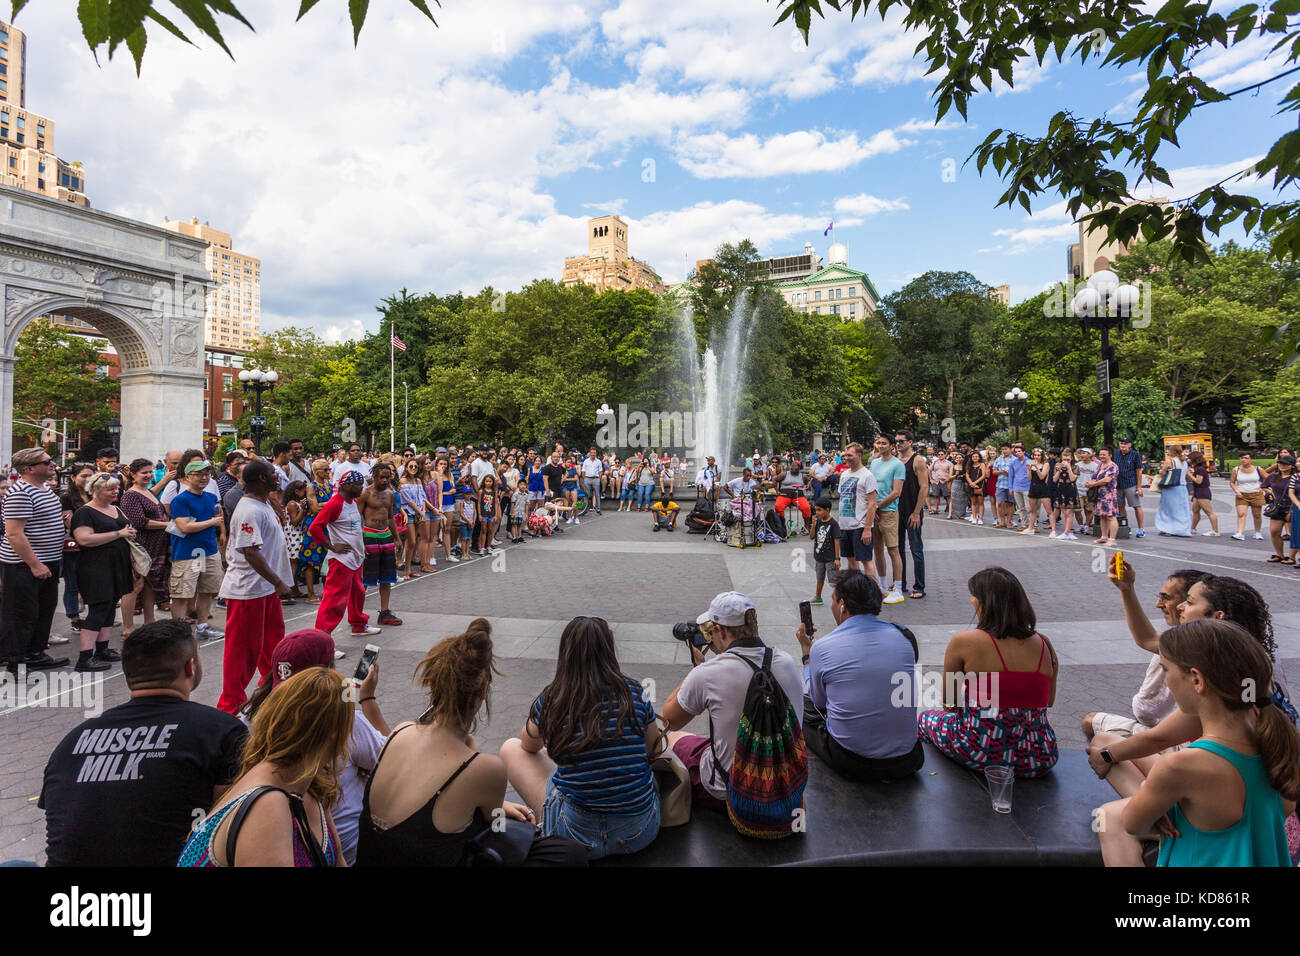 NEW YORK CITY - JULY 3, 2017: People enjoy some street performance in the Washington square park in the heart of Manhattan on a sunny summer Sunday in Stock Photo